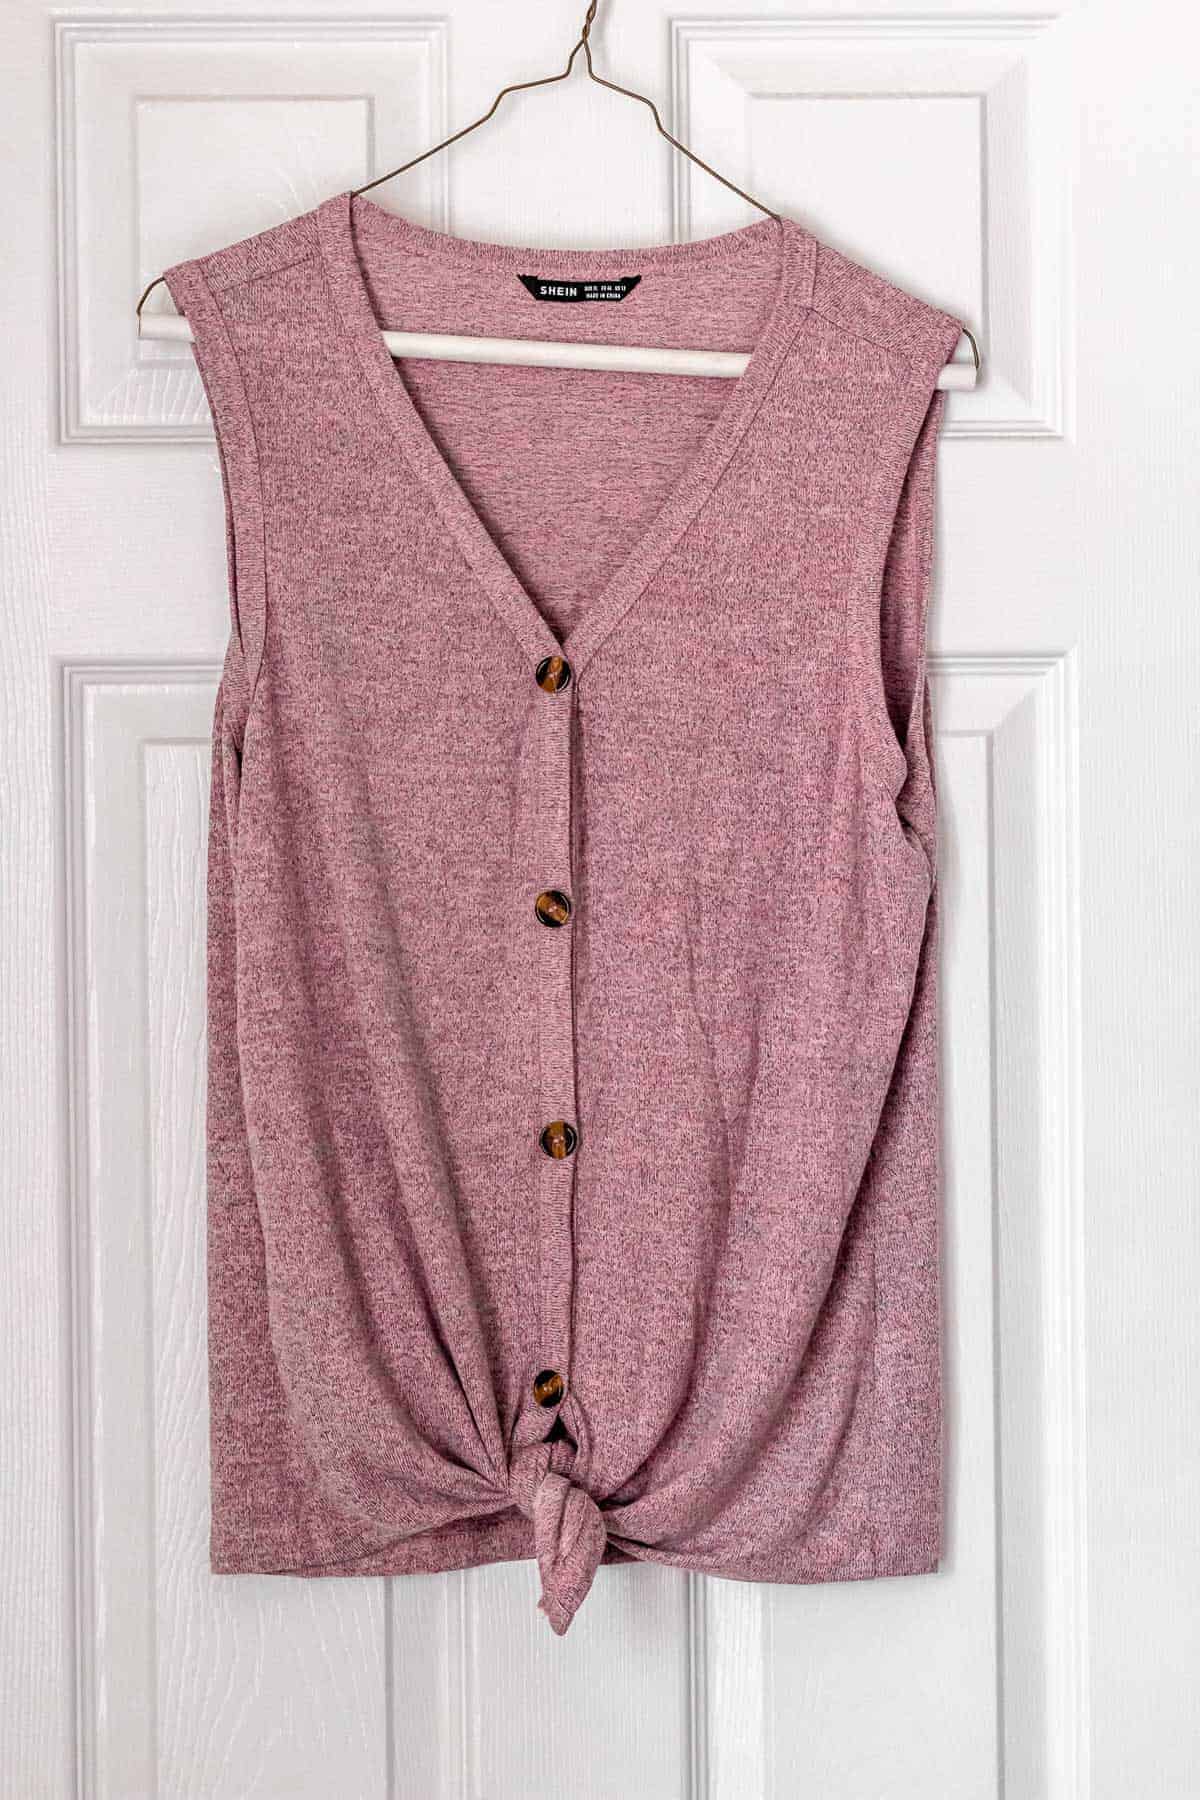 Button Front Knot Hem Tank Top in pink on a hanger